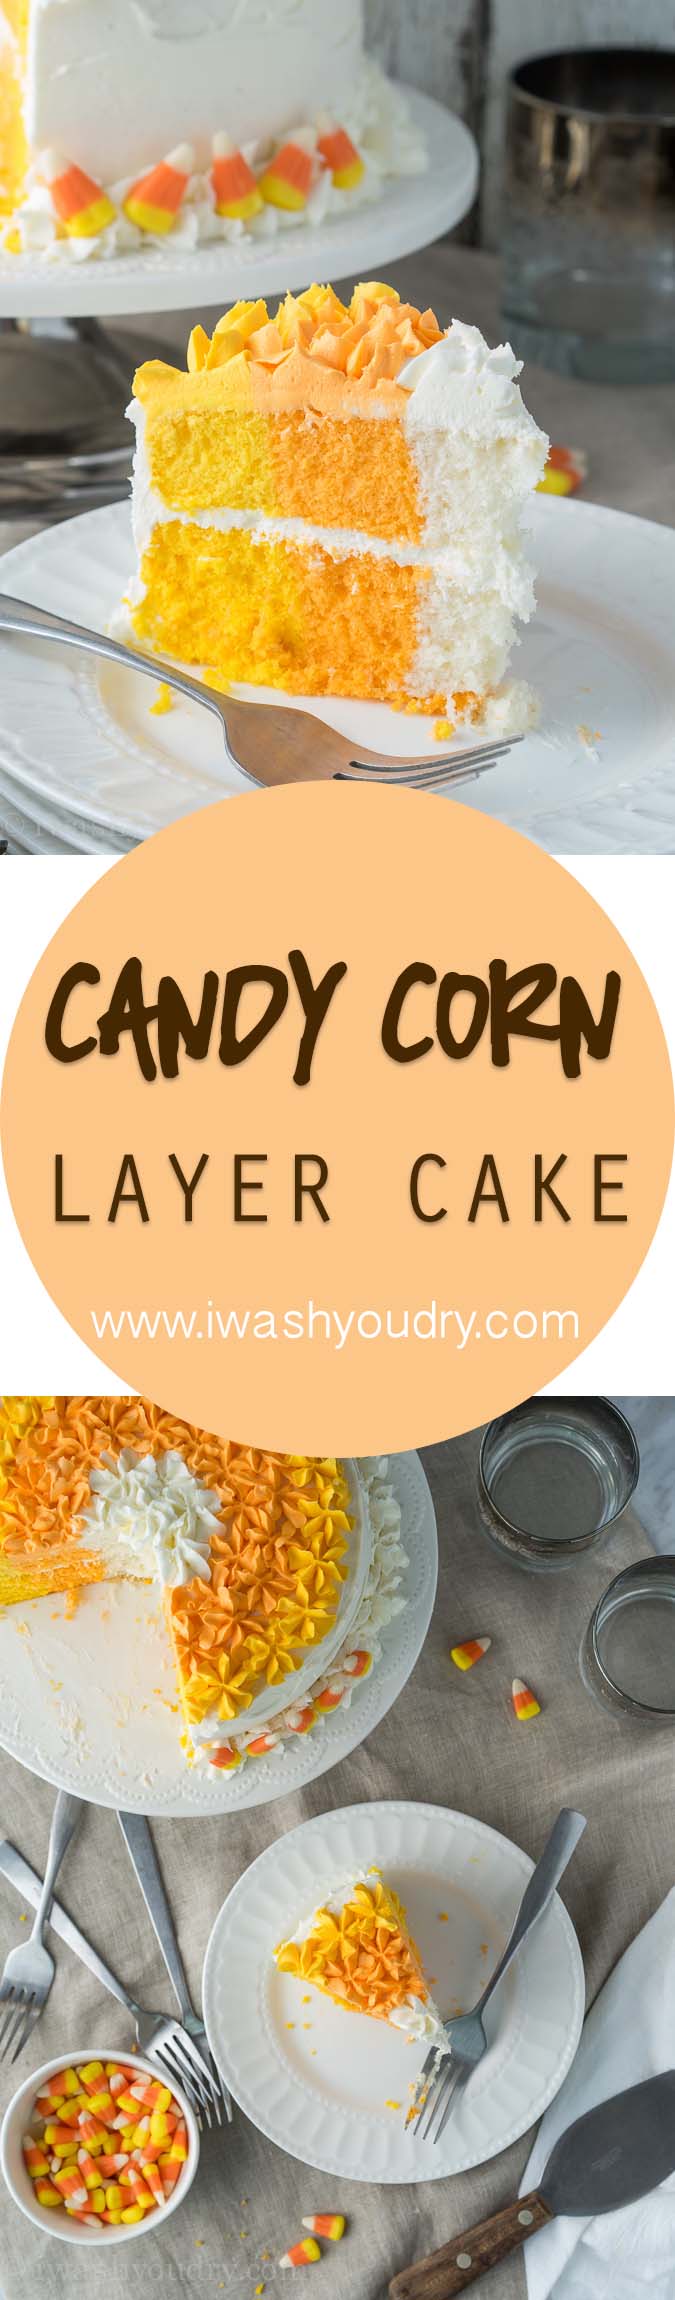 This Candy Corn Layer Cake is such a fun treat to make for Halloween! I love the unique layers!